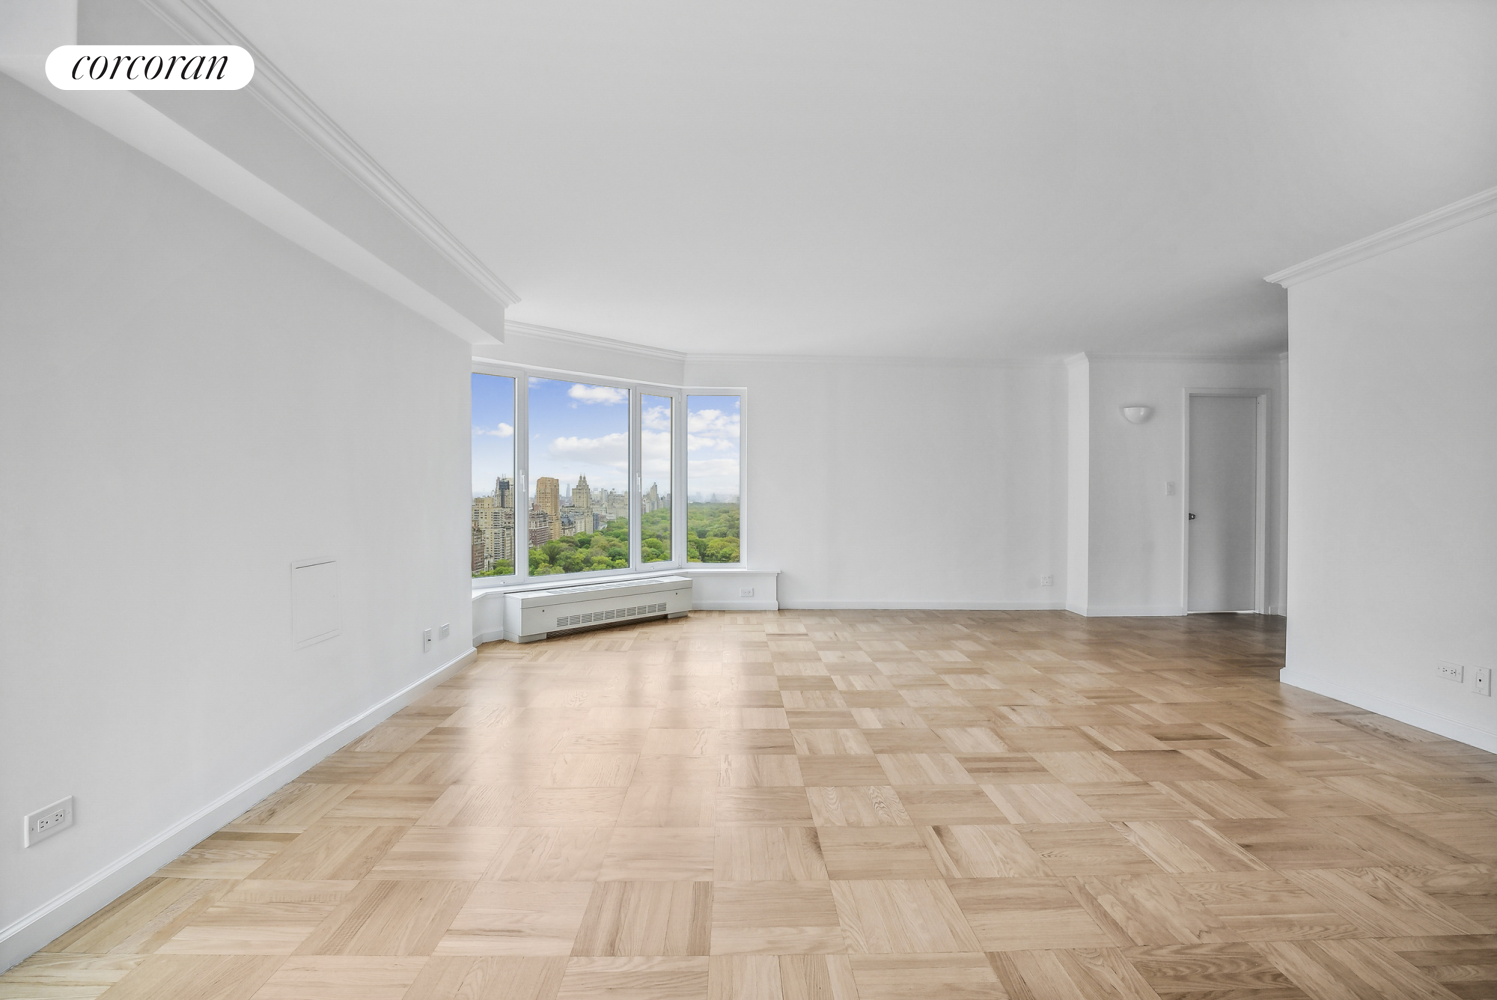 200 Central Park C34, Central Park South, Midtown West, NYC - 2 Bedrooms  
2.5 Bathrooms  
5 Rooms - 